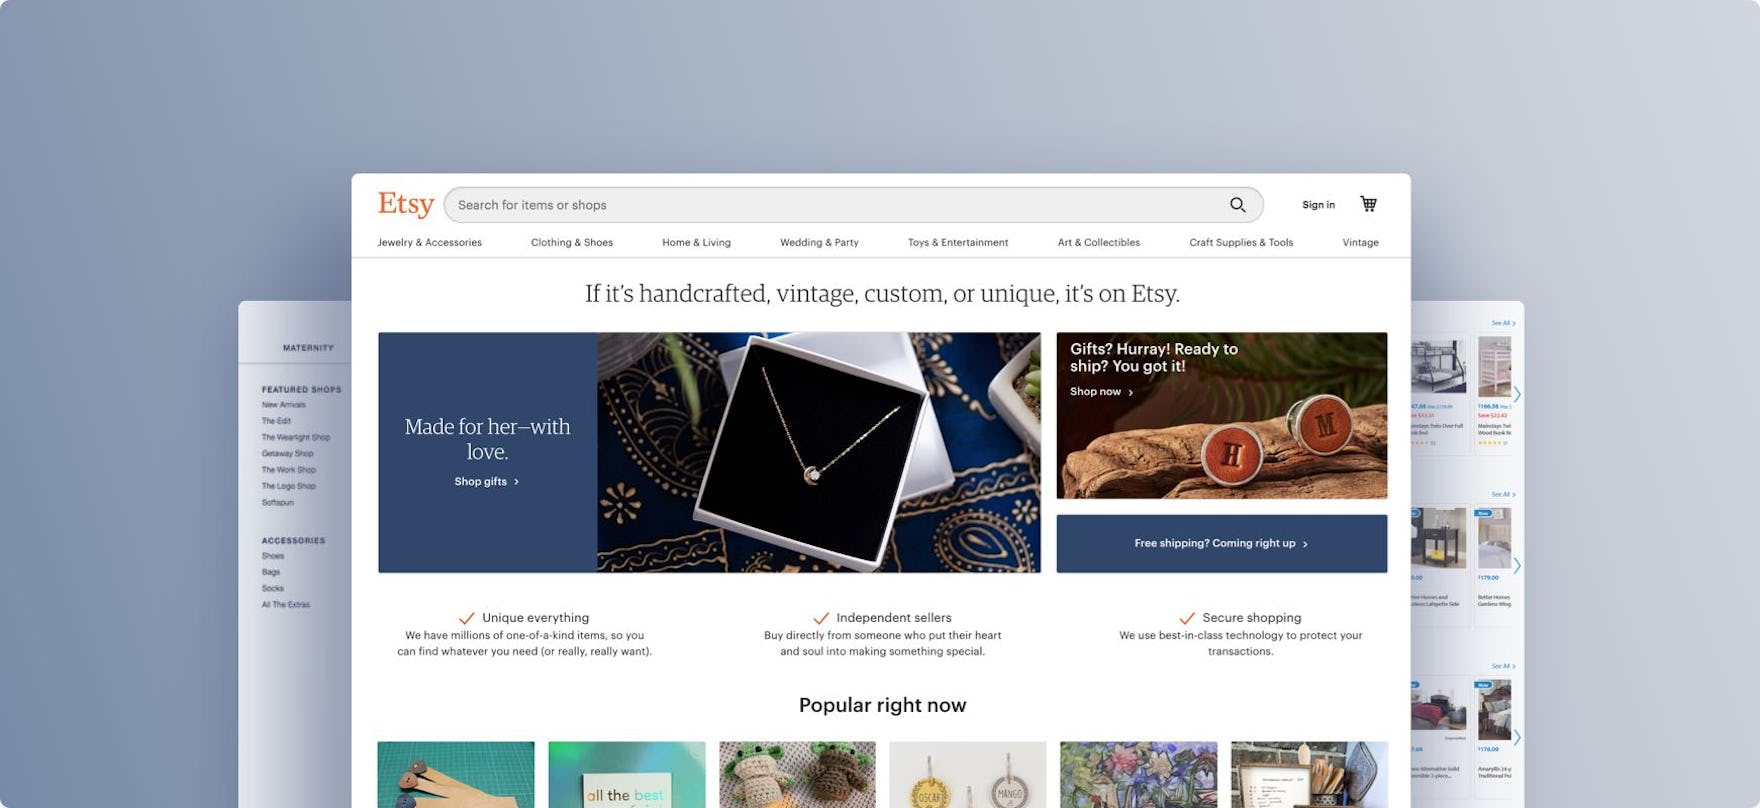 7 eCommerce Homepage Best Practices To Boost UX On Your Website